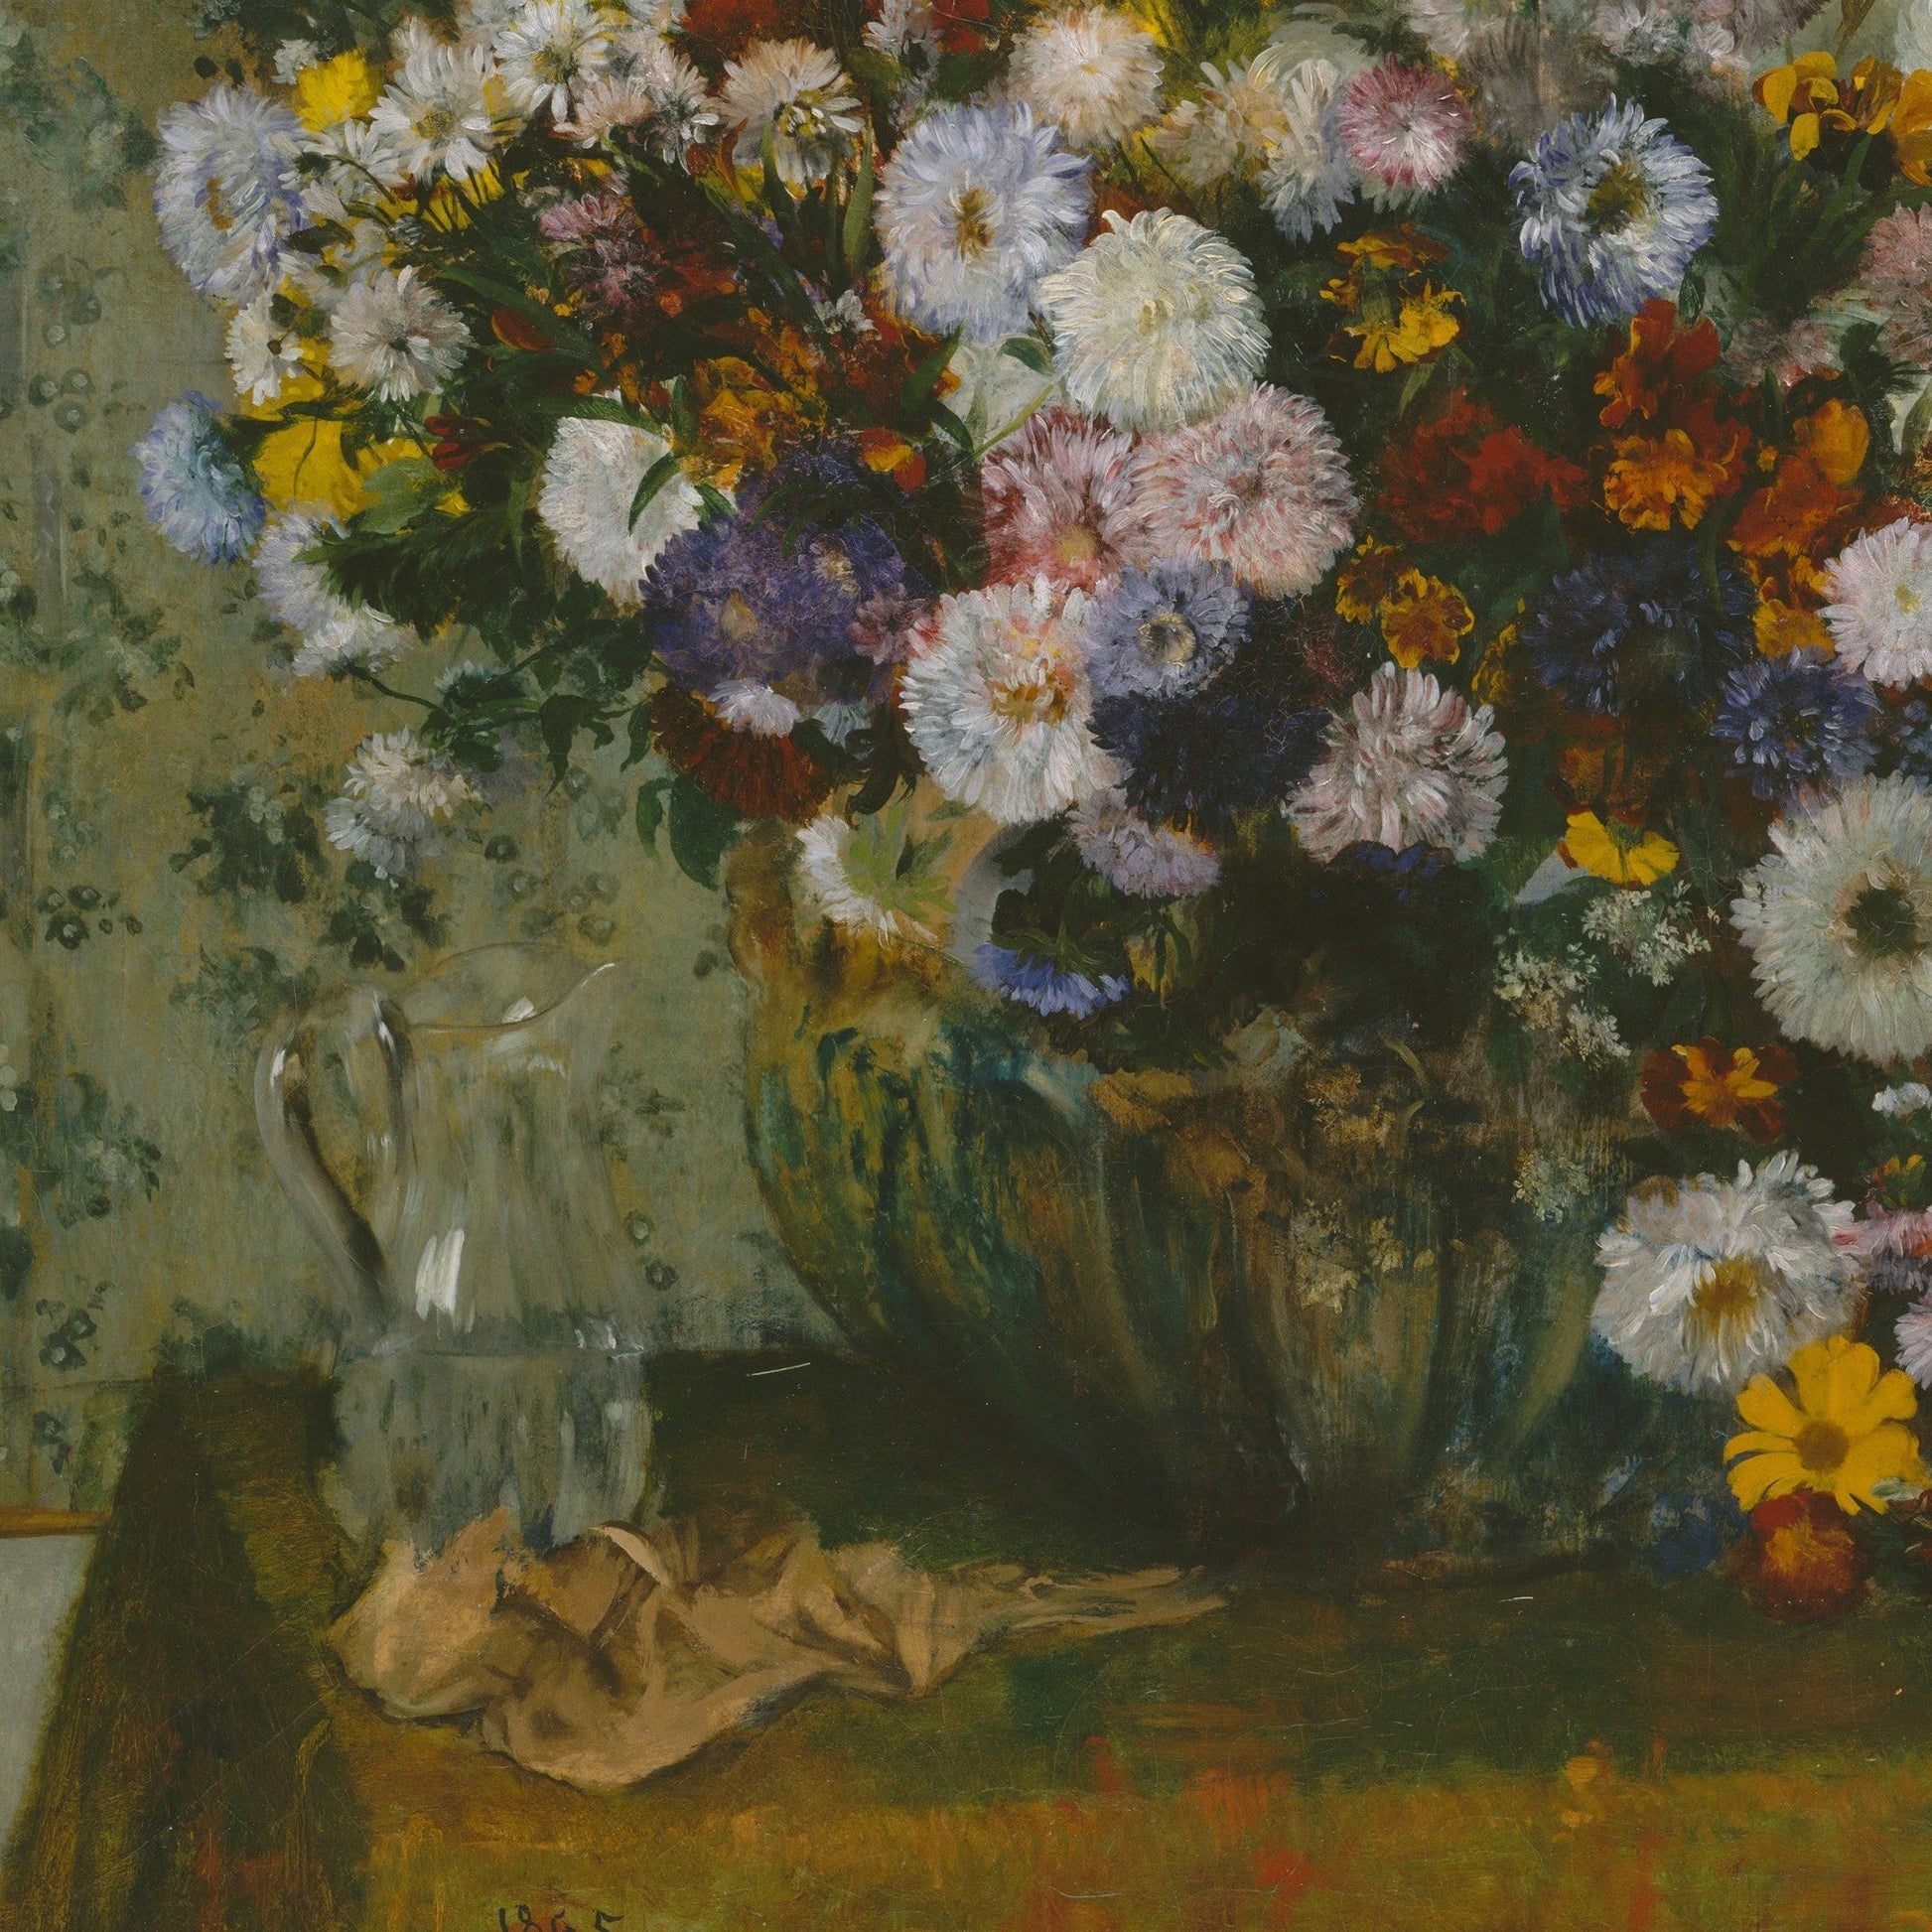 A Woman Seated beside a Vase of Flowers by Edgar Degas, 3d Printed with texture and brush strokes looks like original oil-painting, code:207